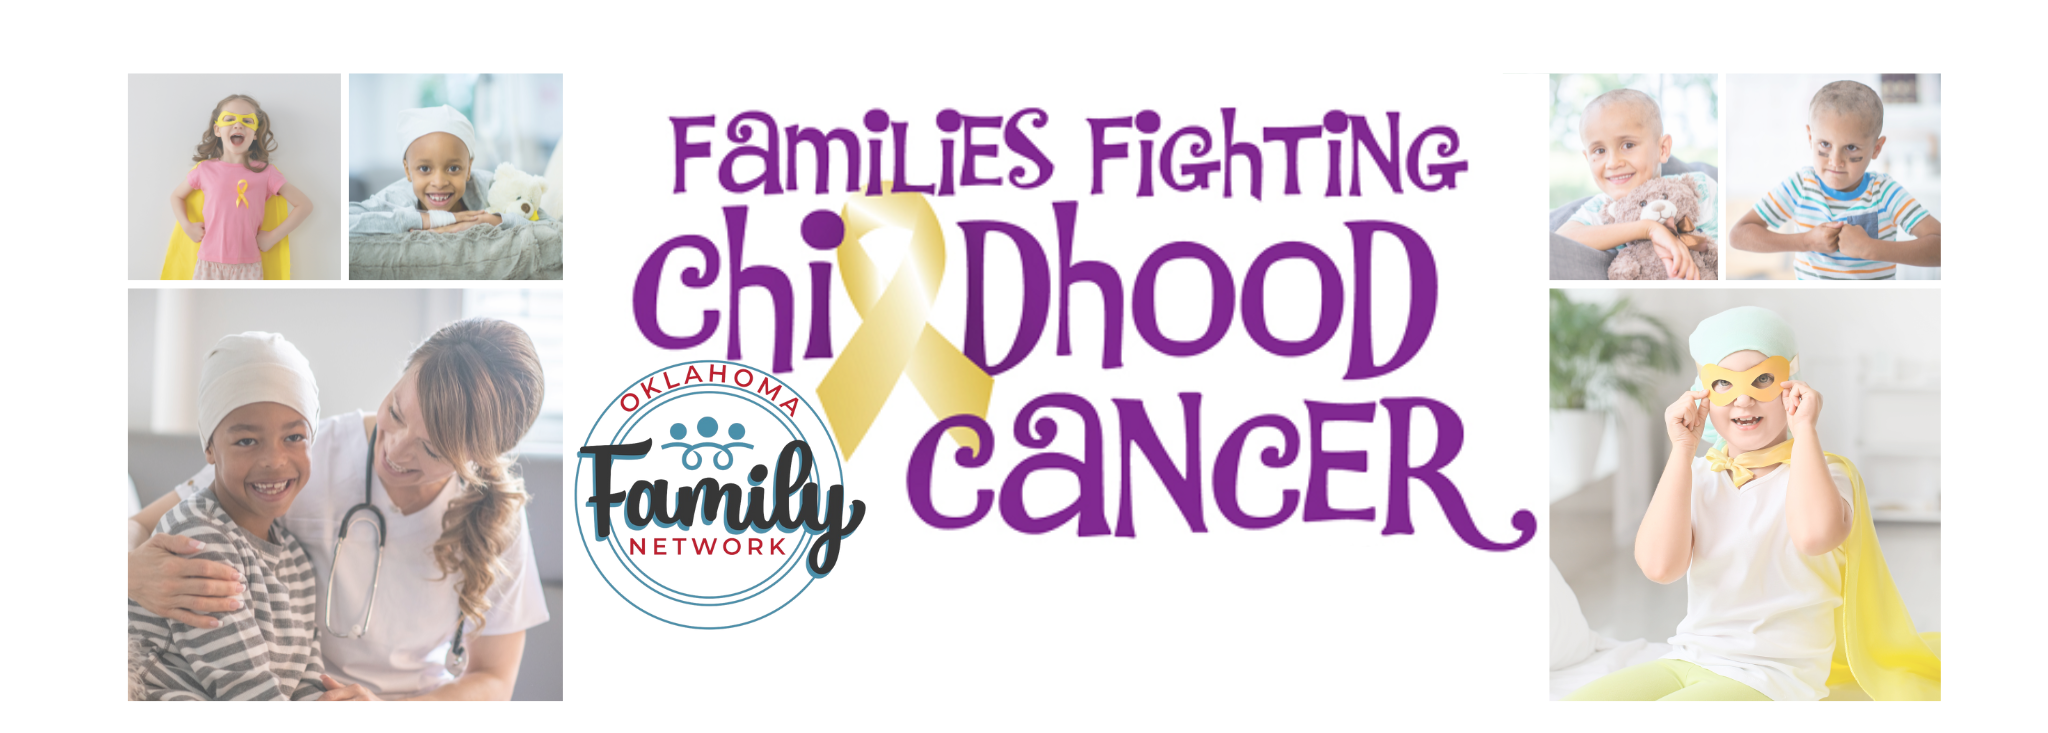 Families Fighting Childhood Cancer, an Oklahoma Family Network Program